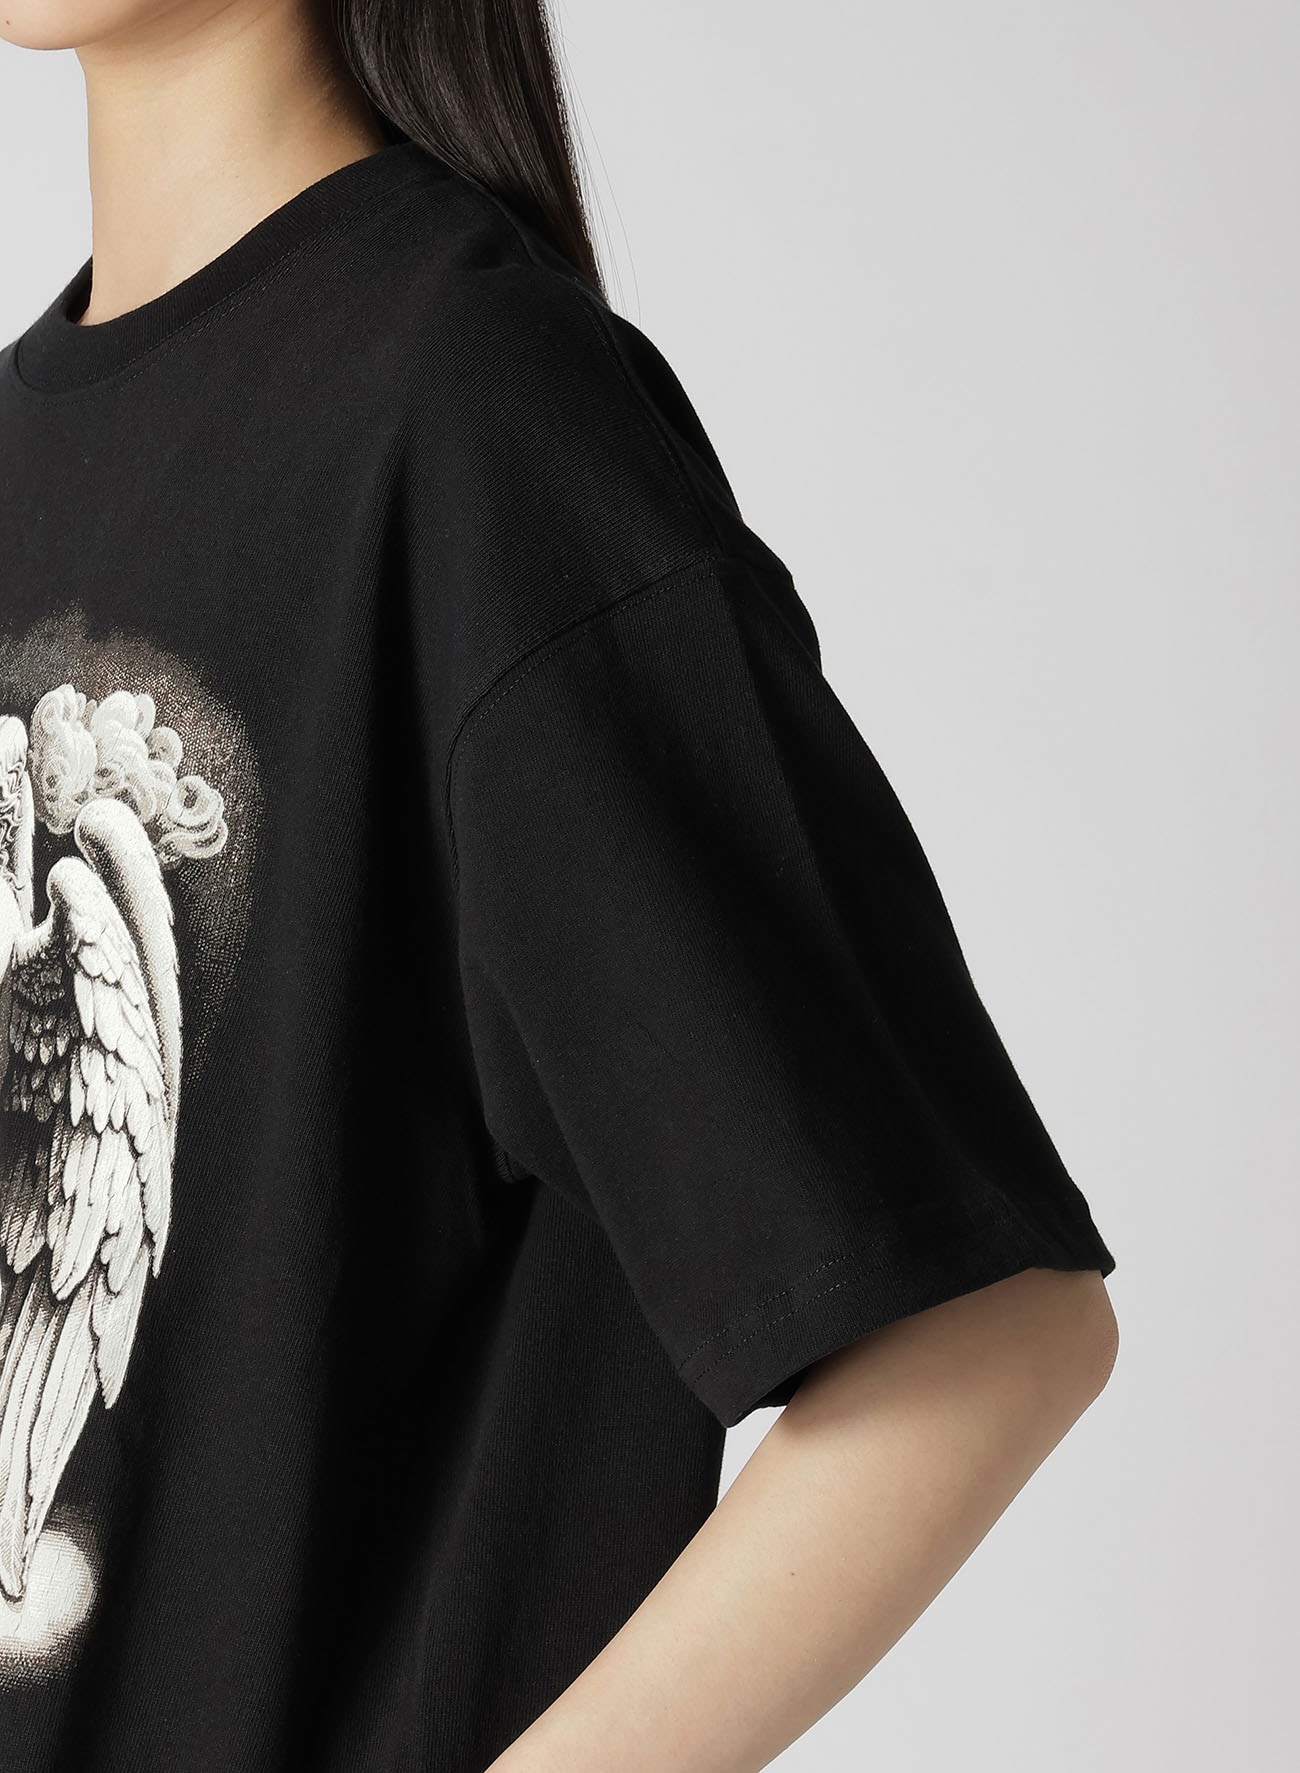 【7/17 12:00(JST) Release】ANGEL PRINTED T-SHIRT A